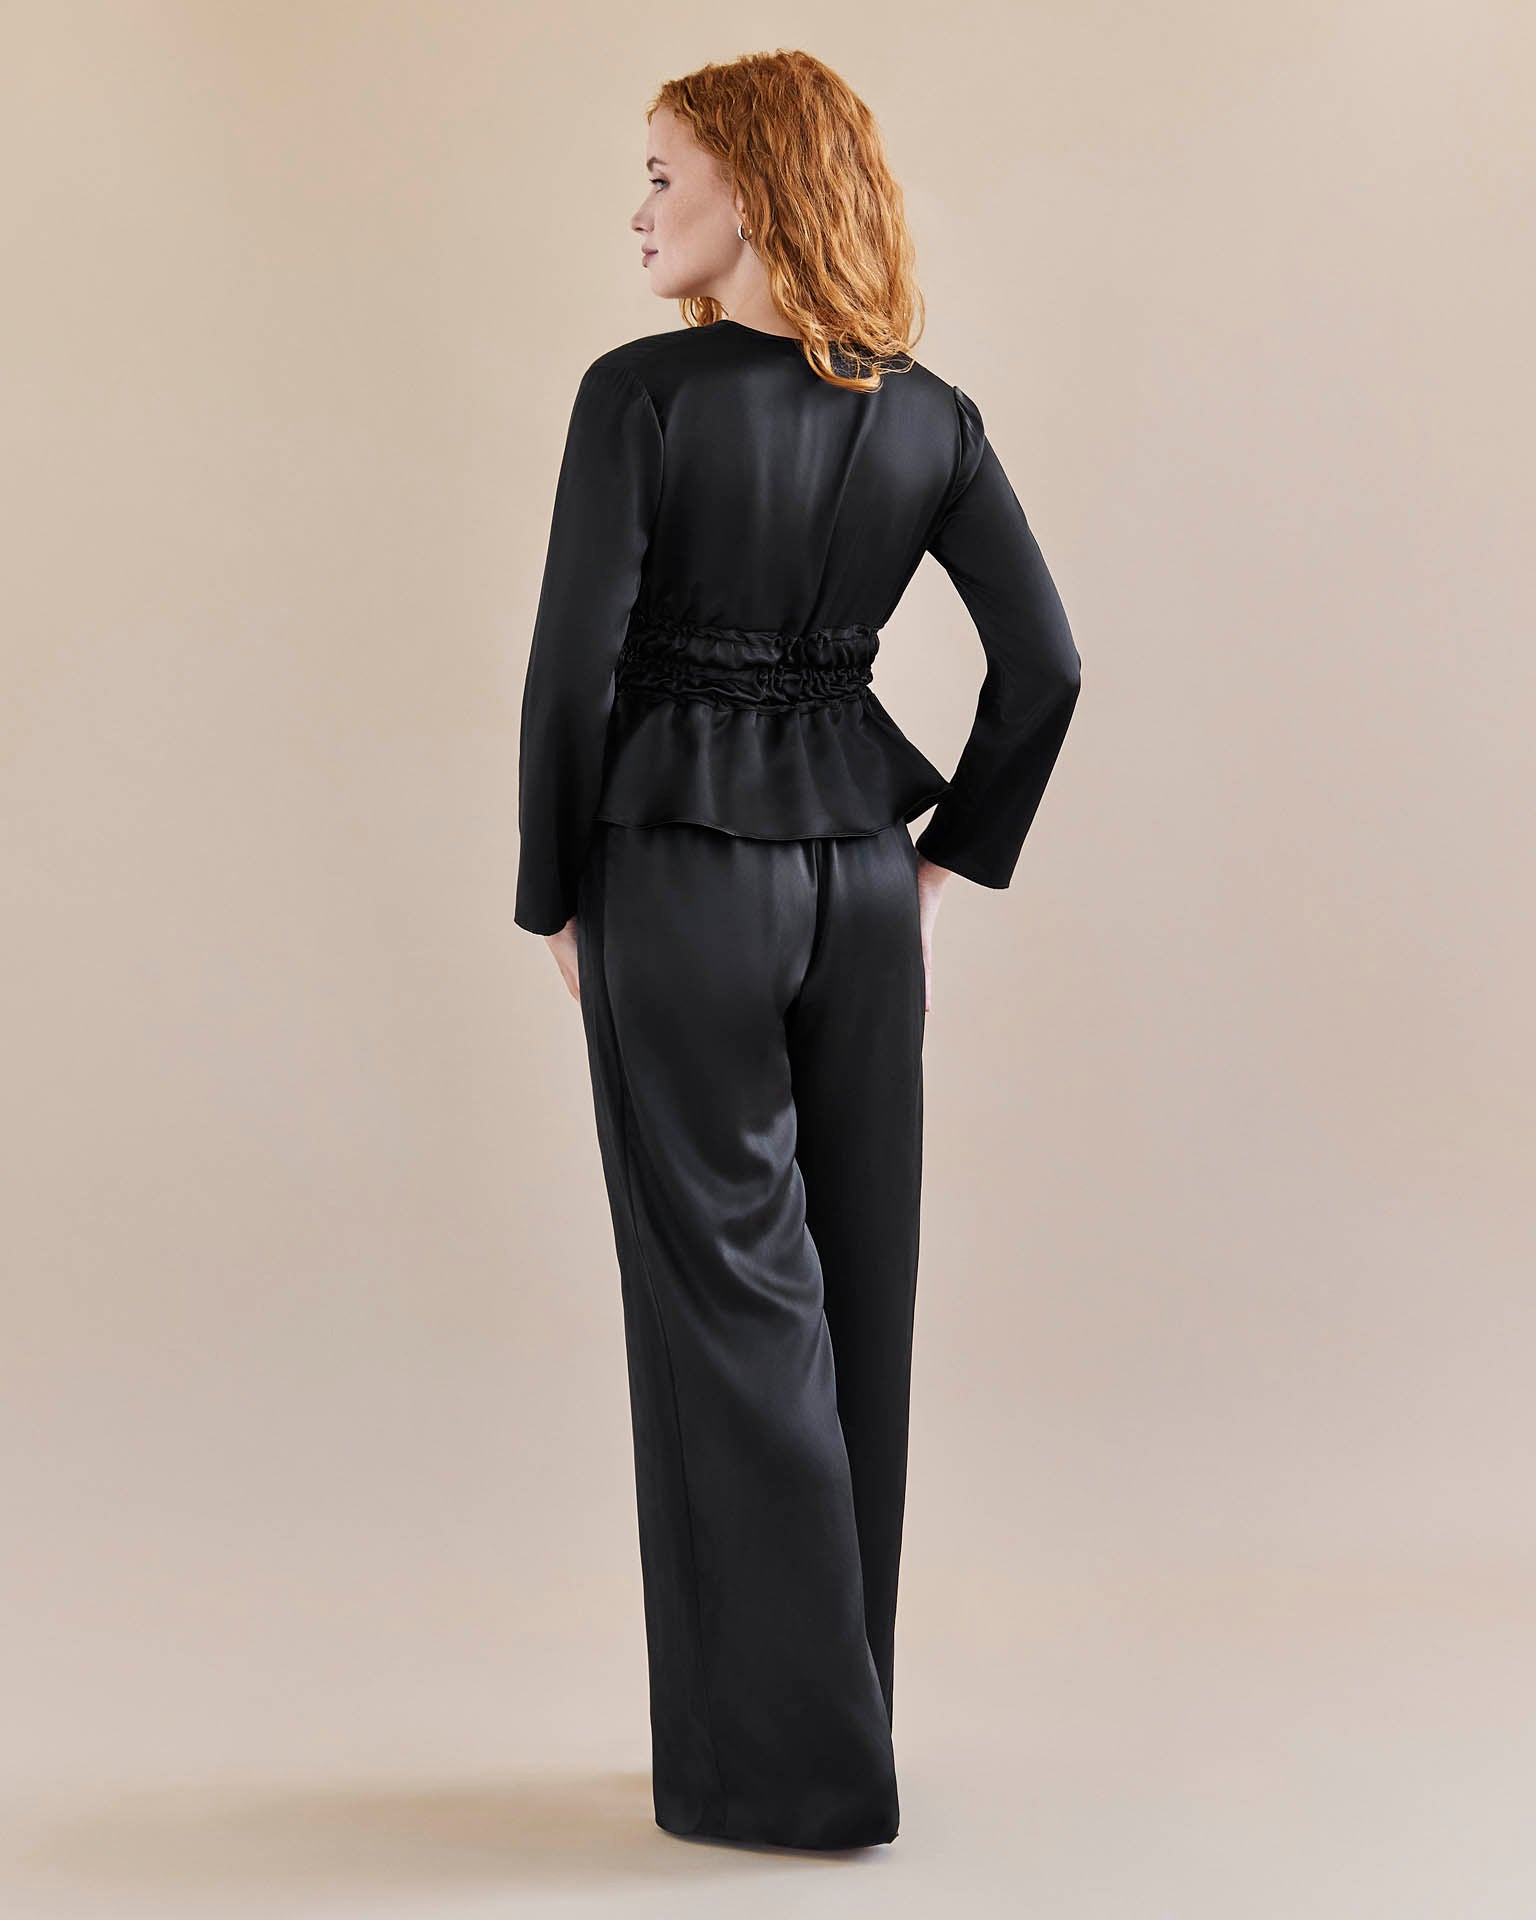 Model wears black silk tie waist top cinched in at the waist for an hourglass look and a pair of black, silk, wide legged trousers with a tuxedo stripe. Pictured from the back